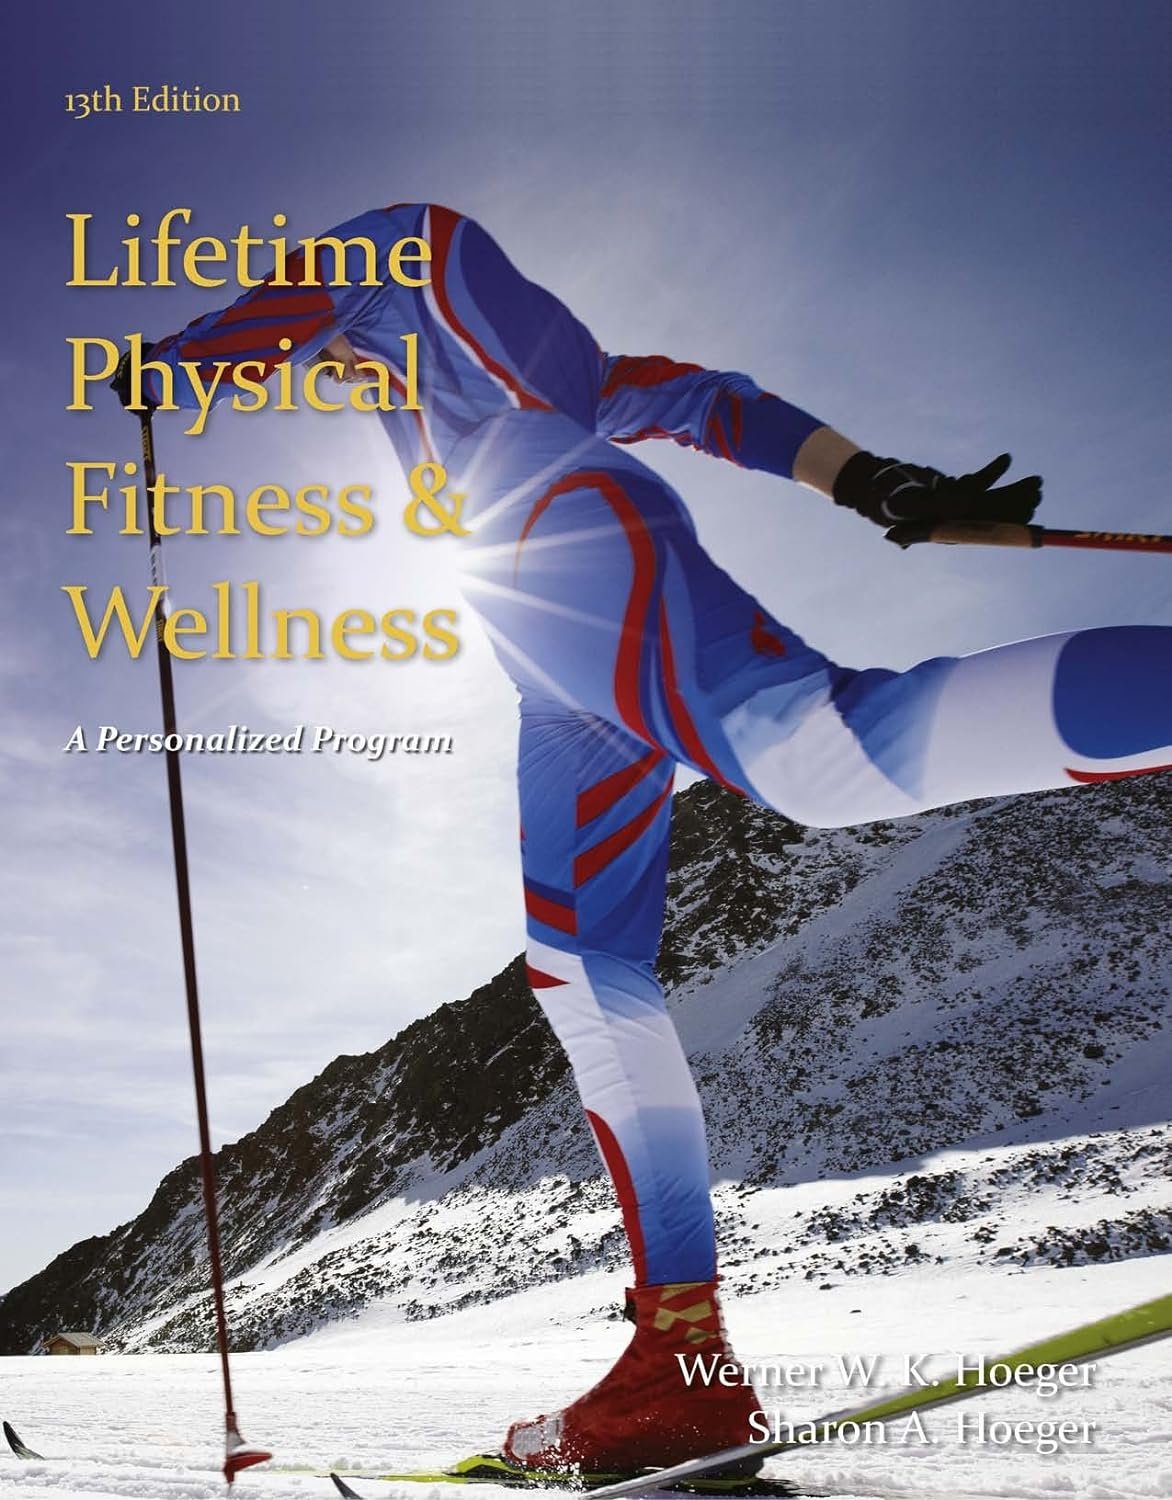 Lifetime Physical Fitness and Wellness: A Personalized Program 013 Edition Review